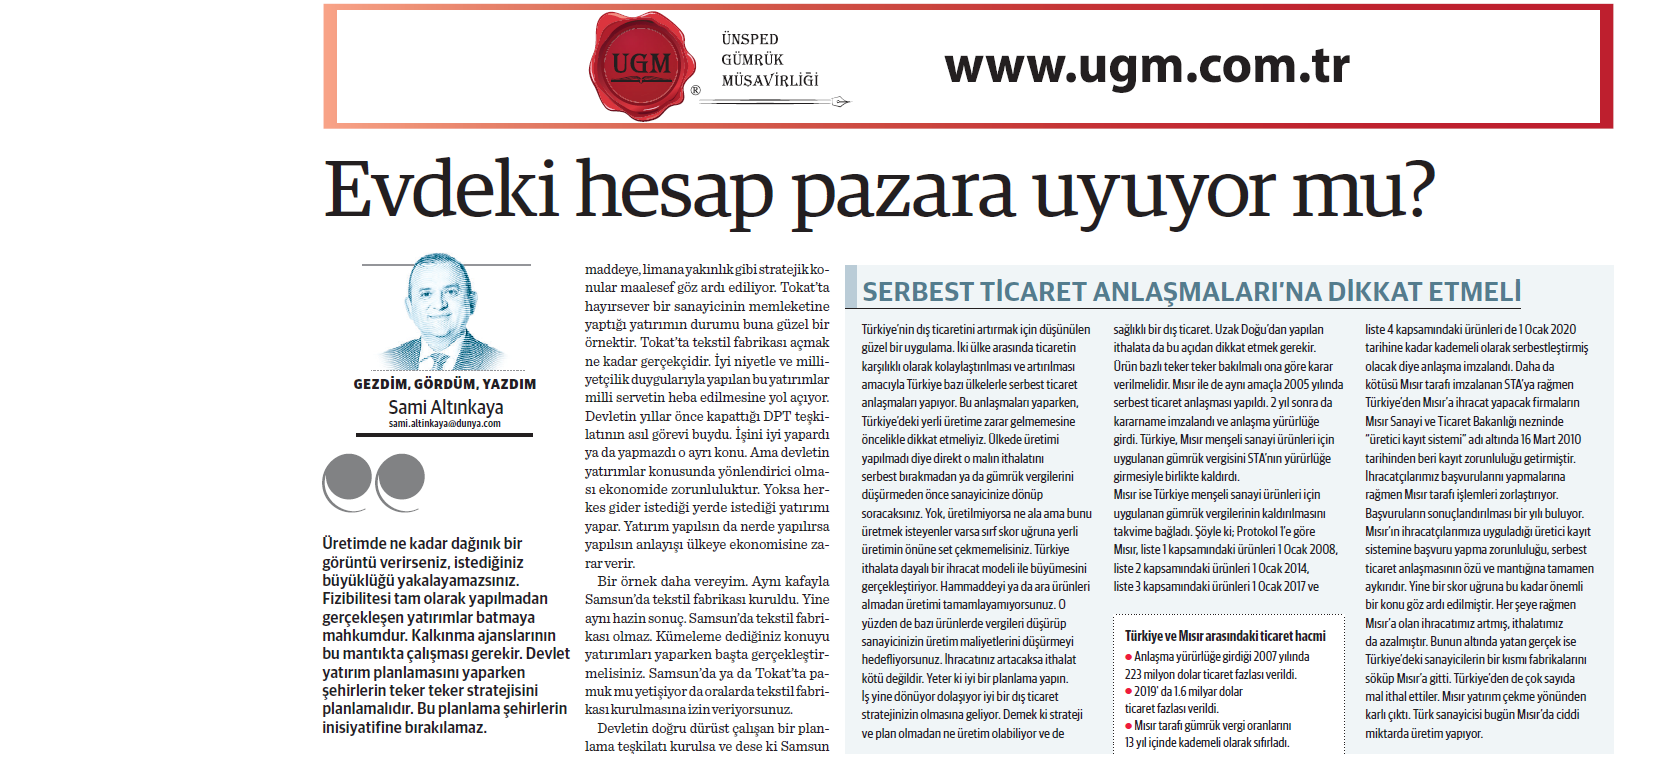 Article of Sami Altınkaya, UGM Corporate Communication Director titled “May things go as planned?” was published in the Dünya newspaper on 21.09.2020.